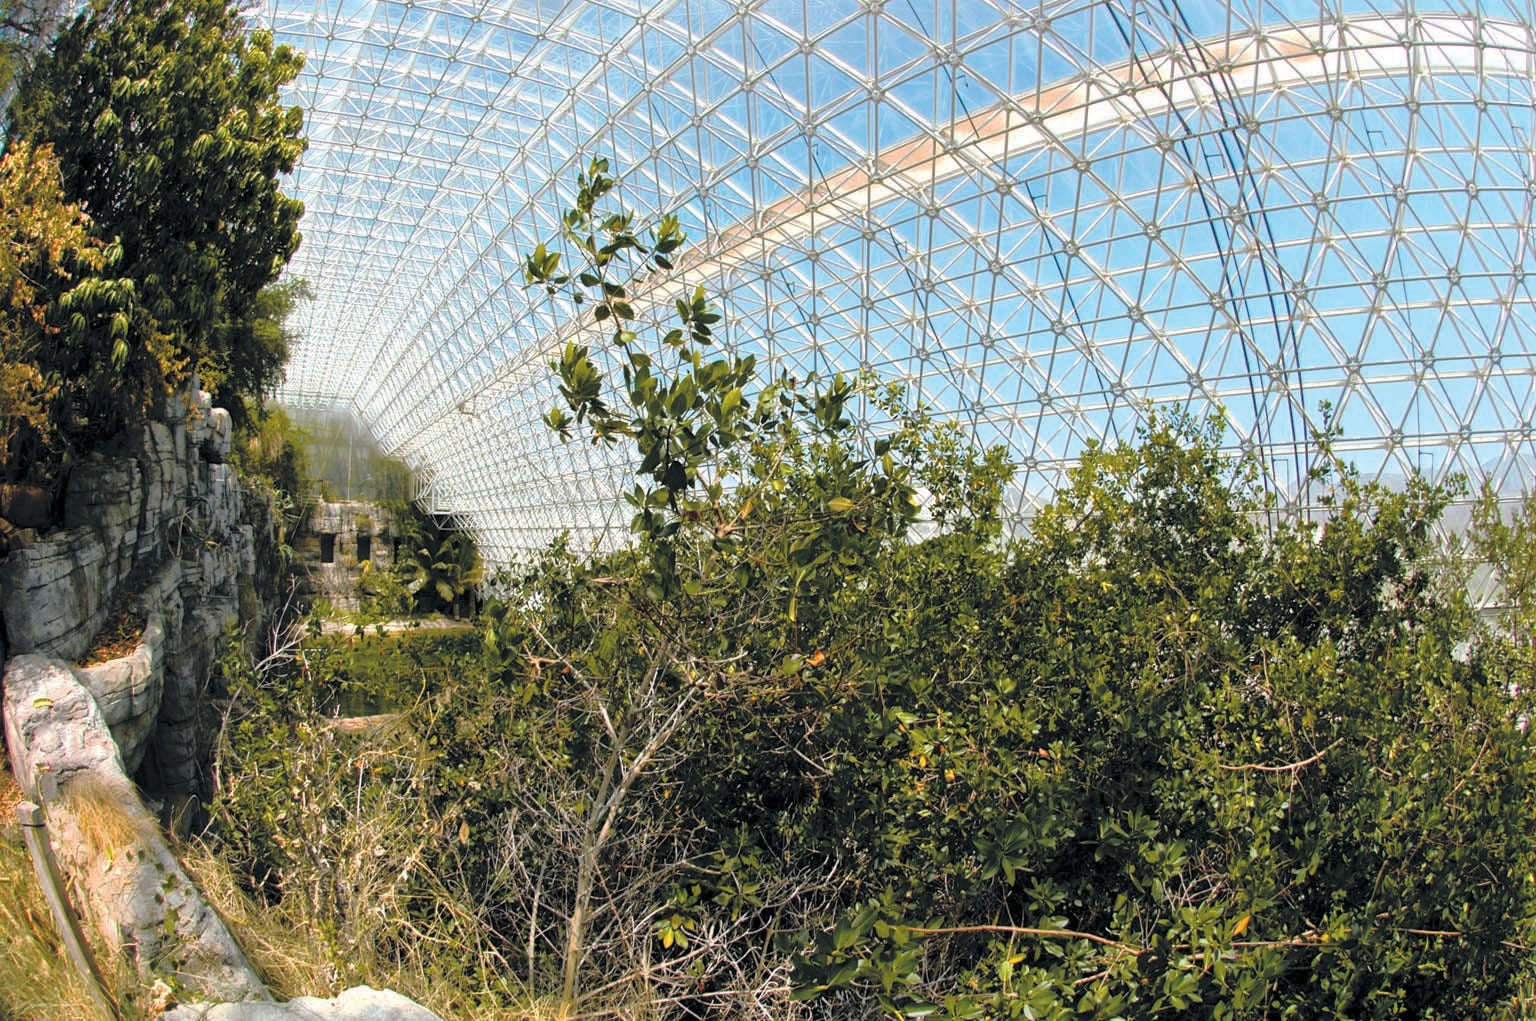 Interior view of greenhouse identified as “Biosphere2.”